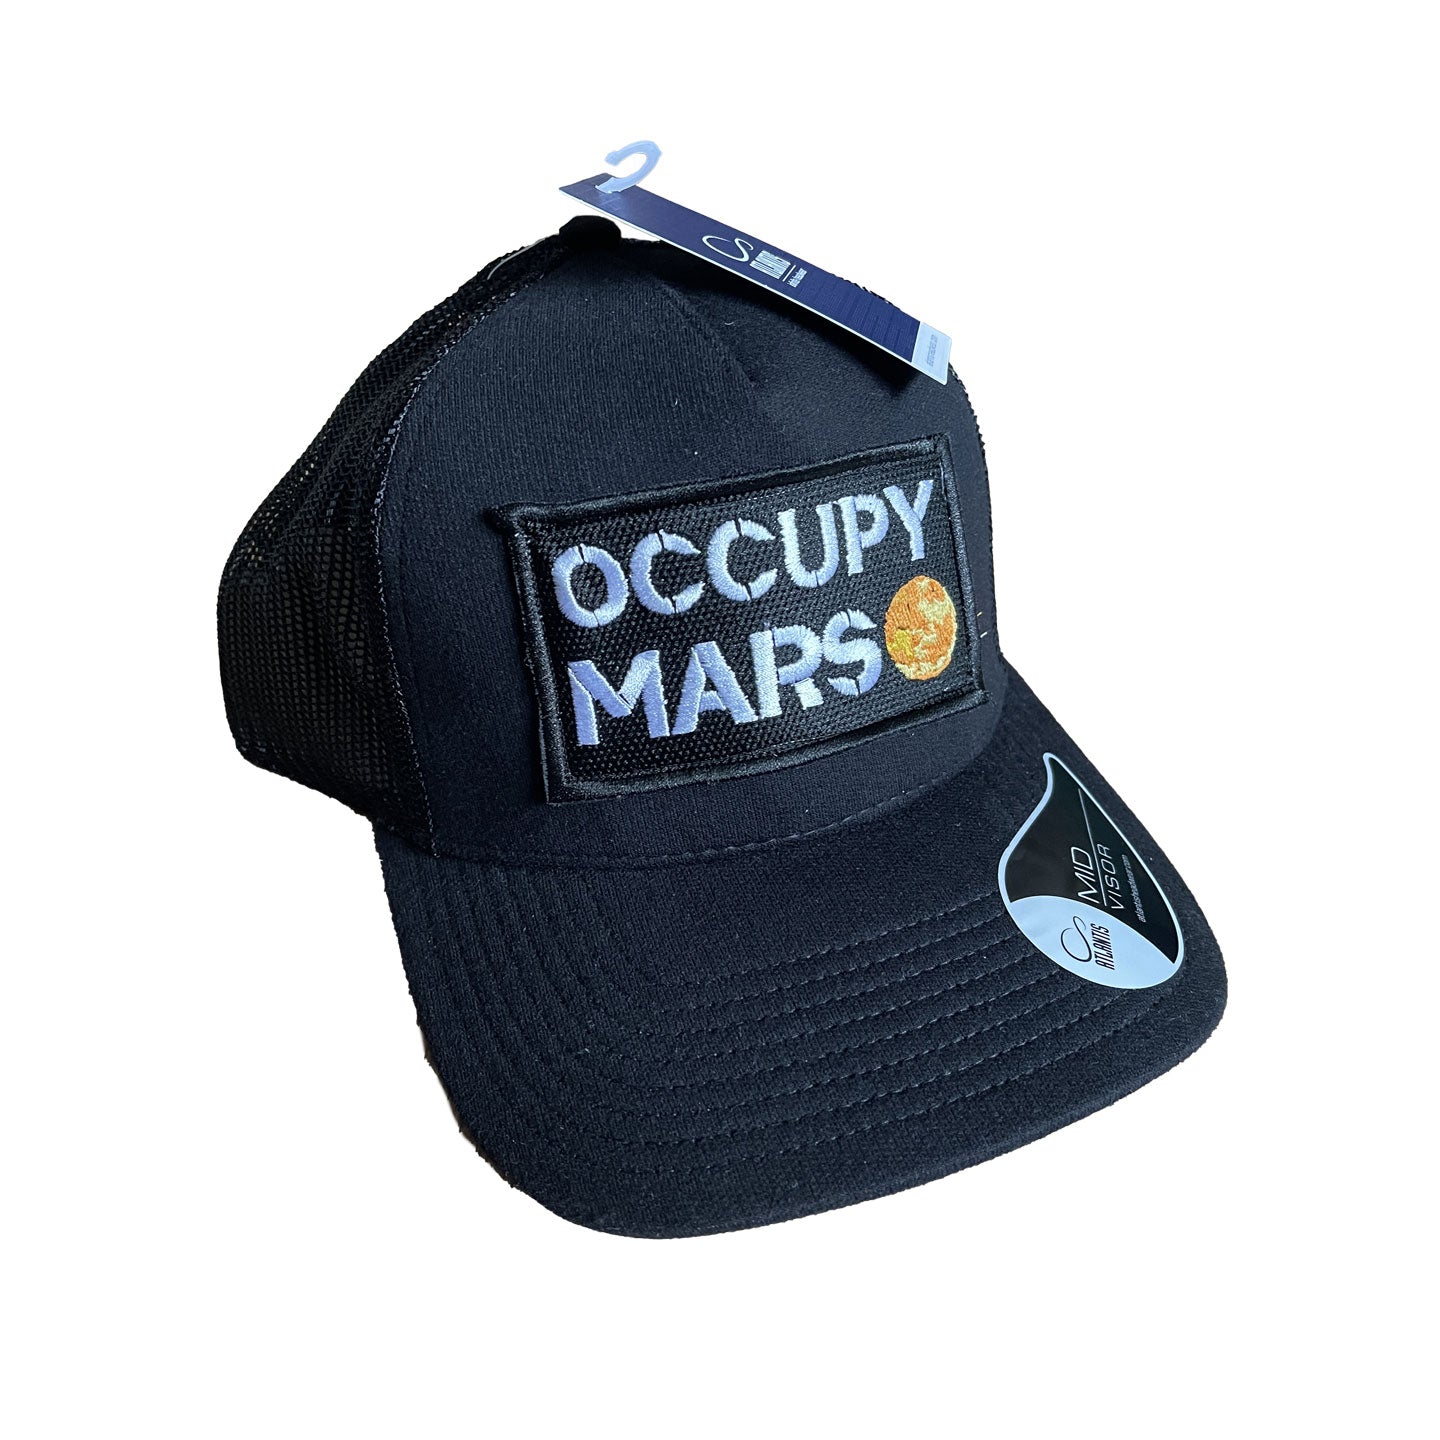 Occupy Mars Cap Embroidery Red Planet Rover Cap Explore Mars with Spacex